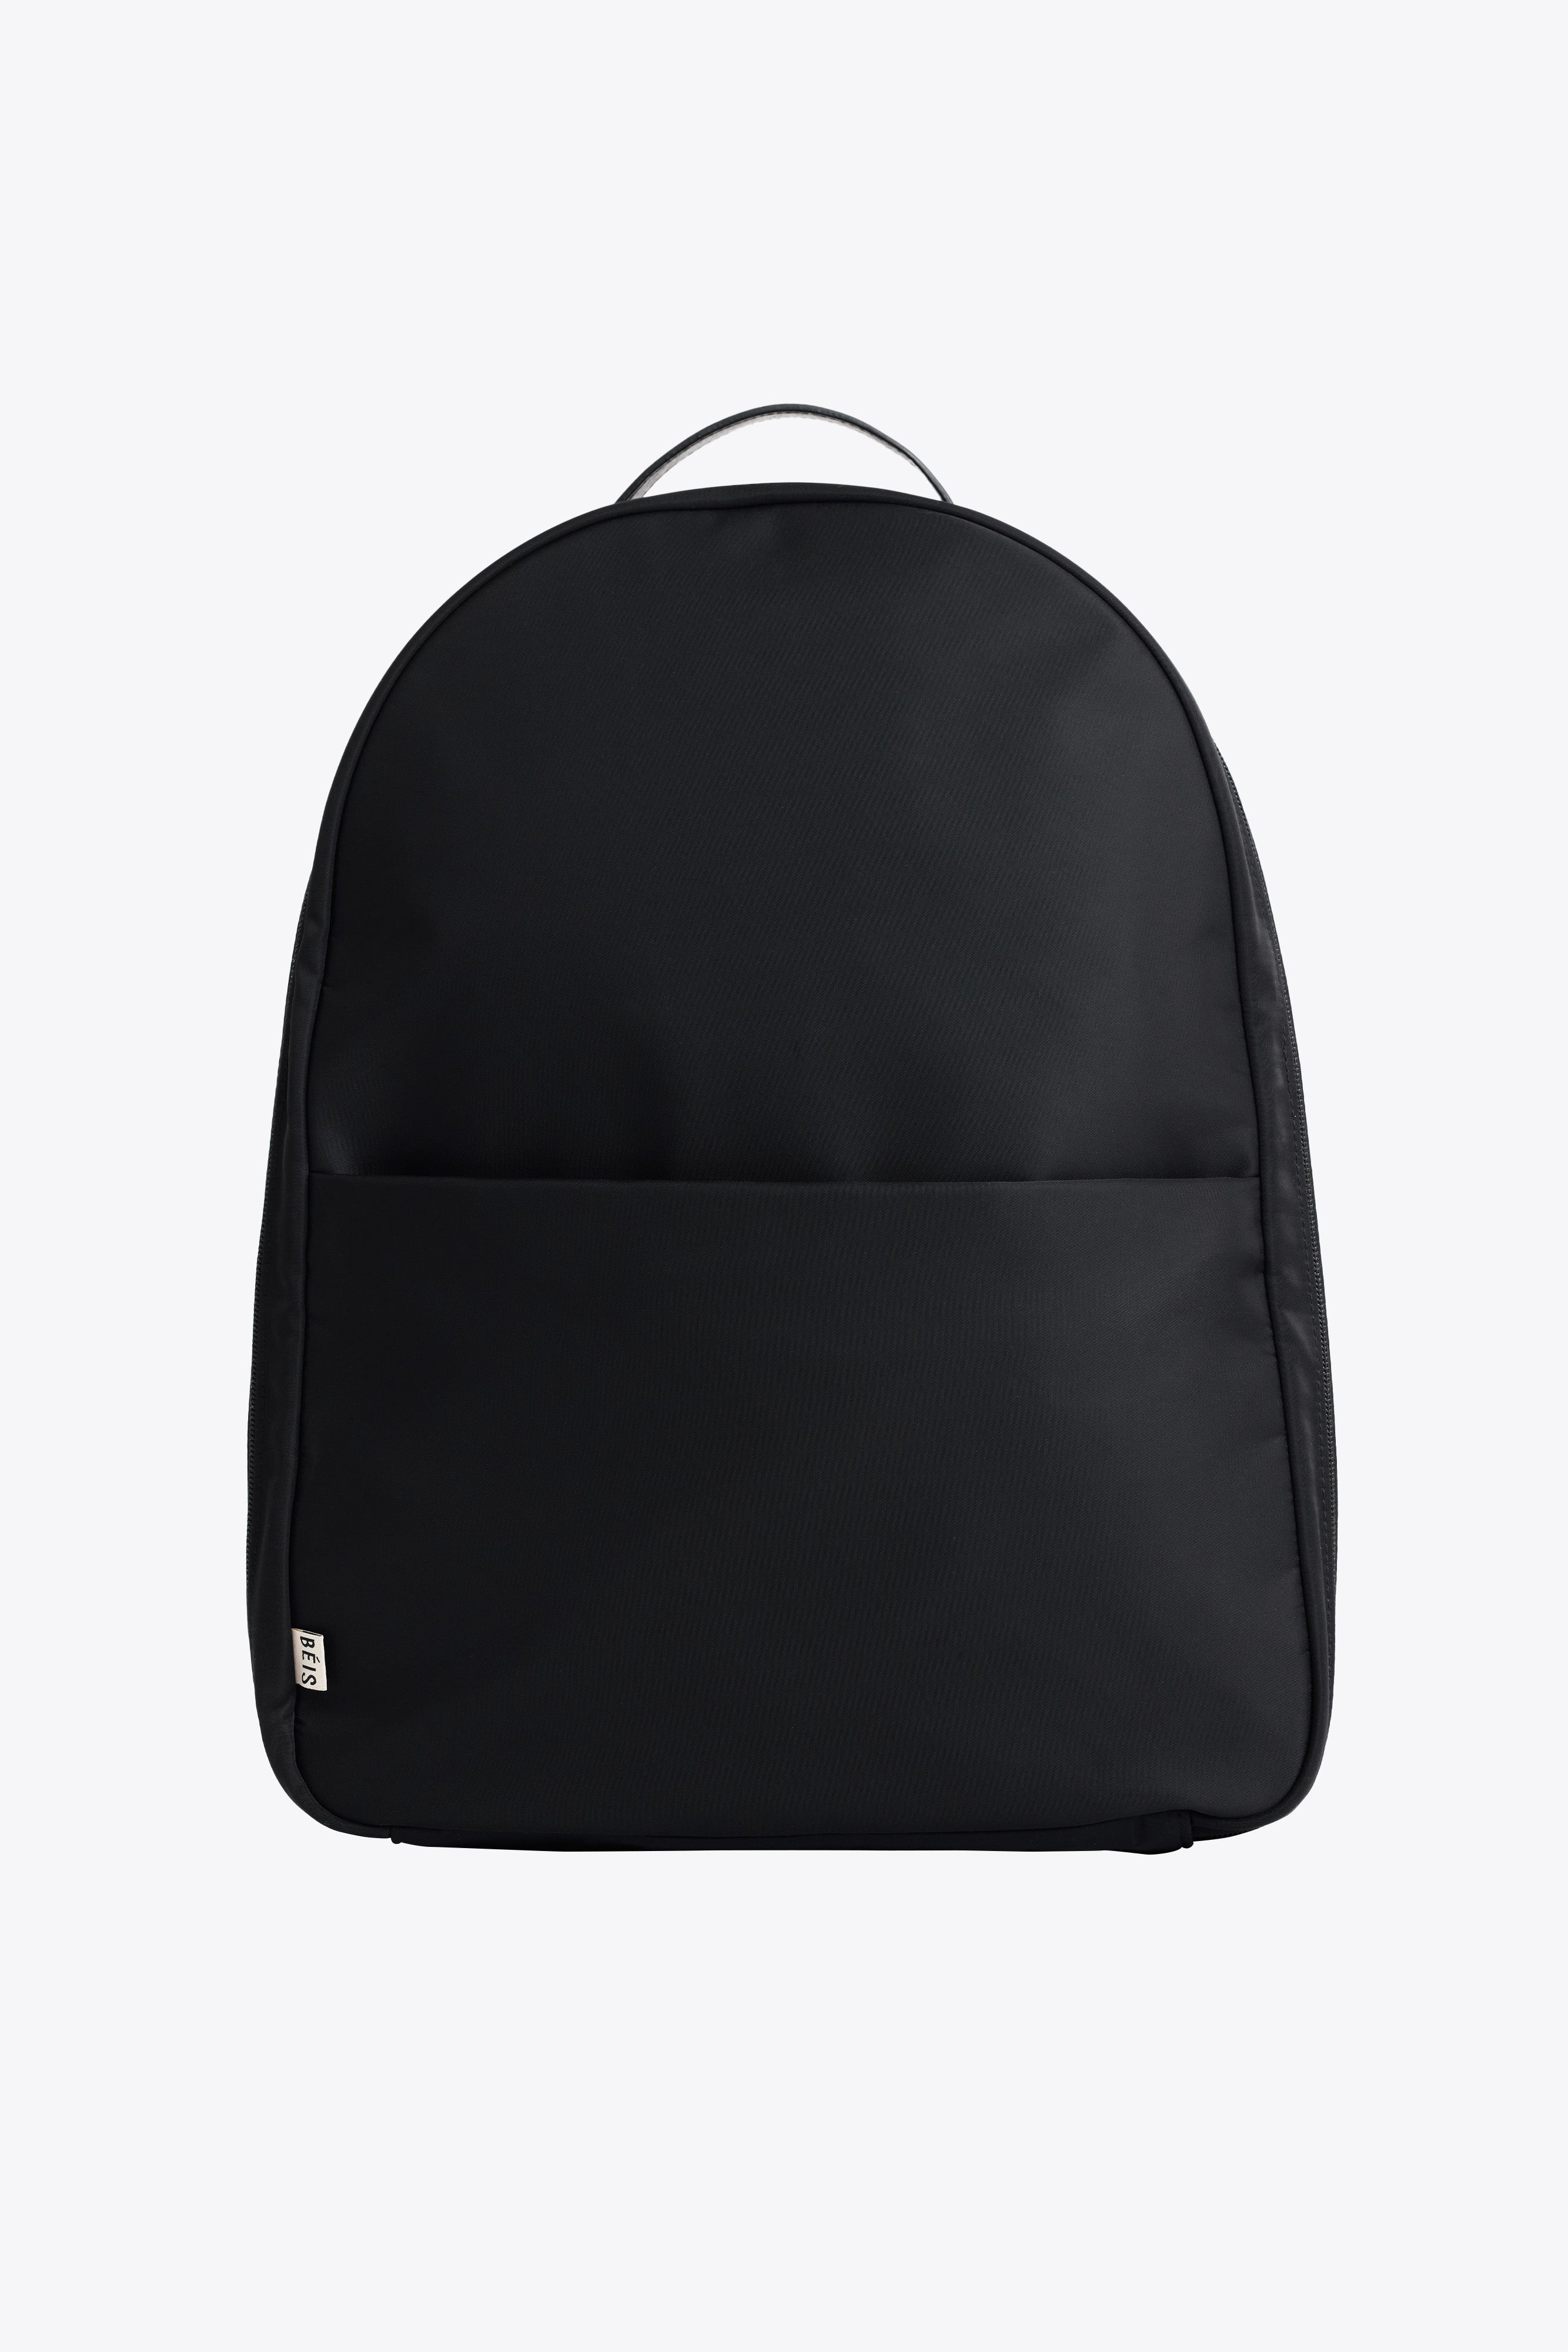 Plain Unisex Girls Black School Backpack, For College at Rs 260/piece in  Kanpur